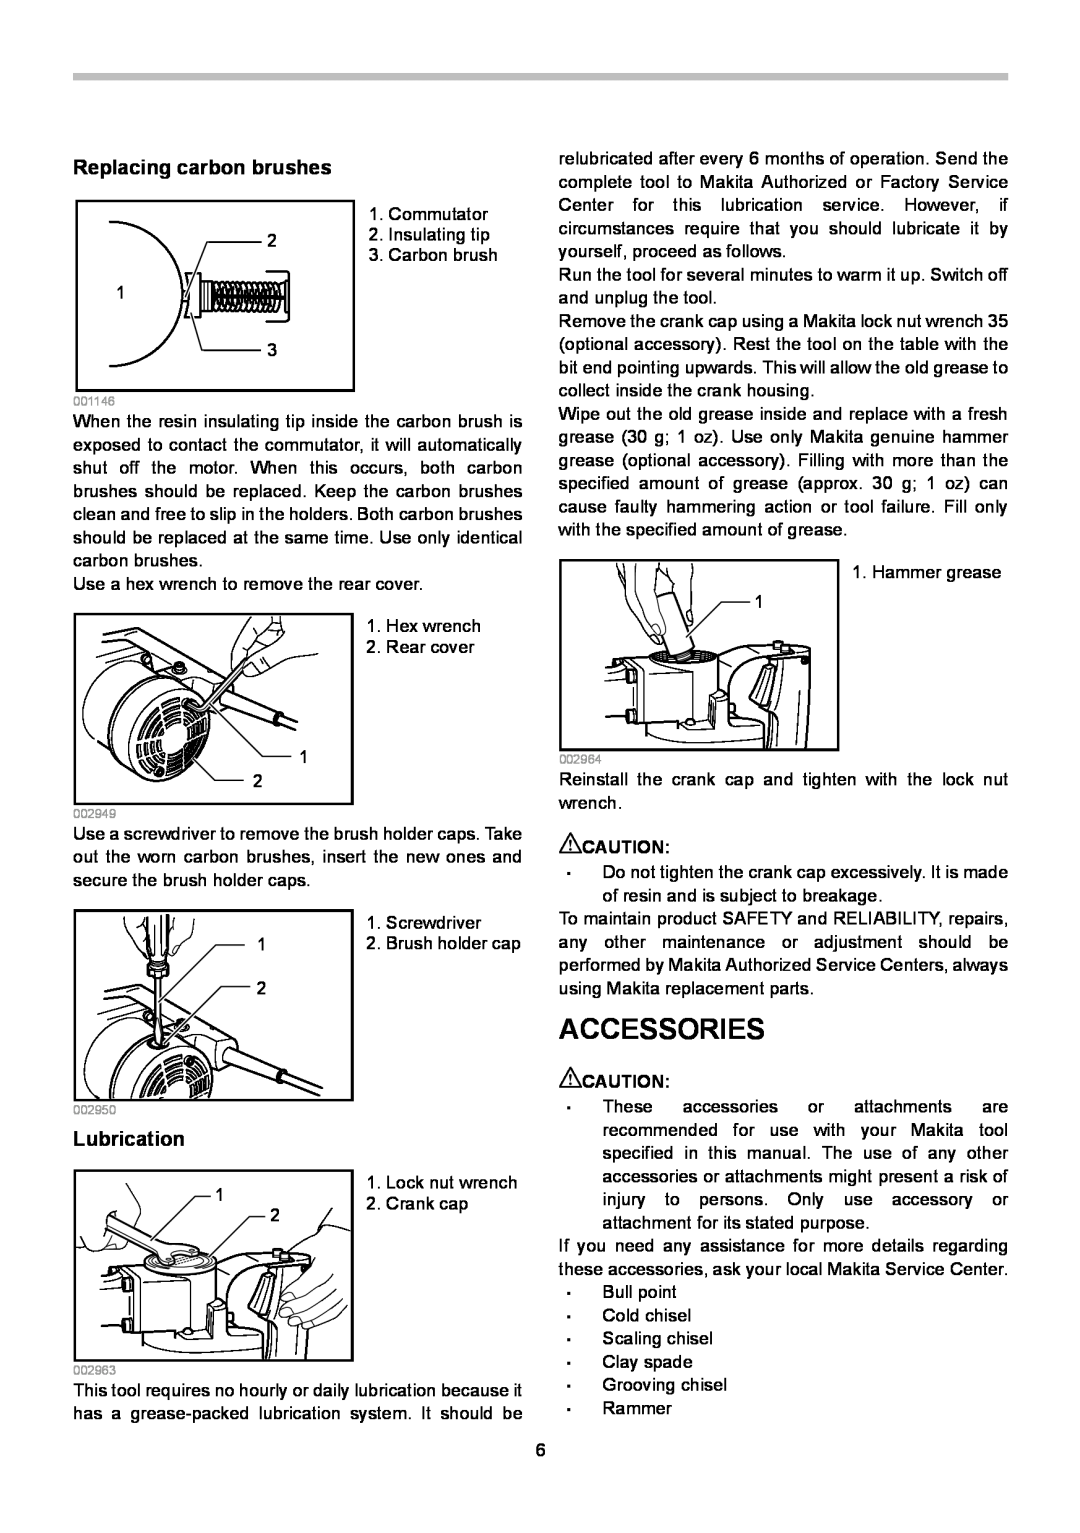 Makita HM0810T 010079 2 instruction manual Accessories, Replacing carbon brushes, Lubrication 